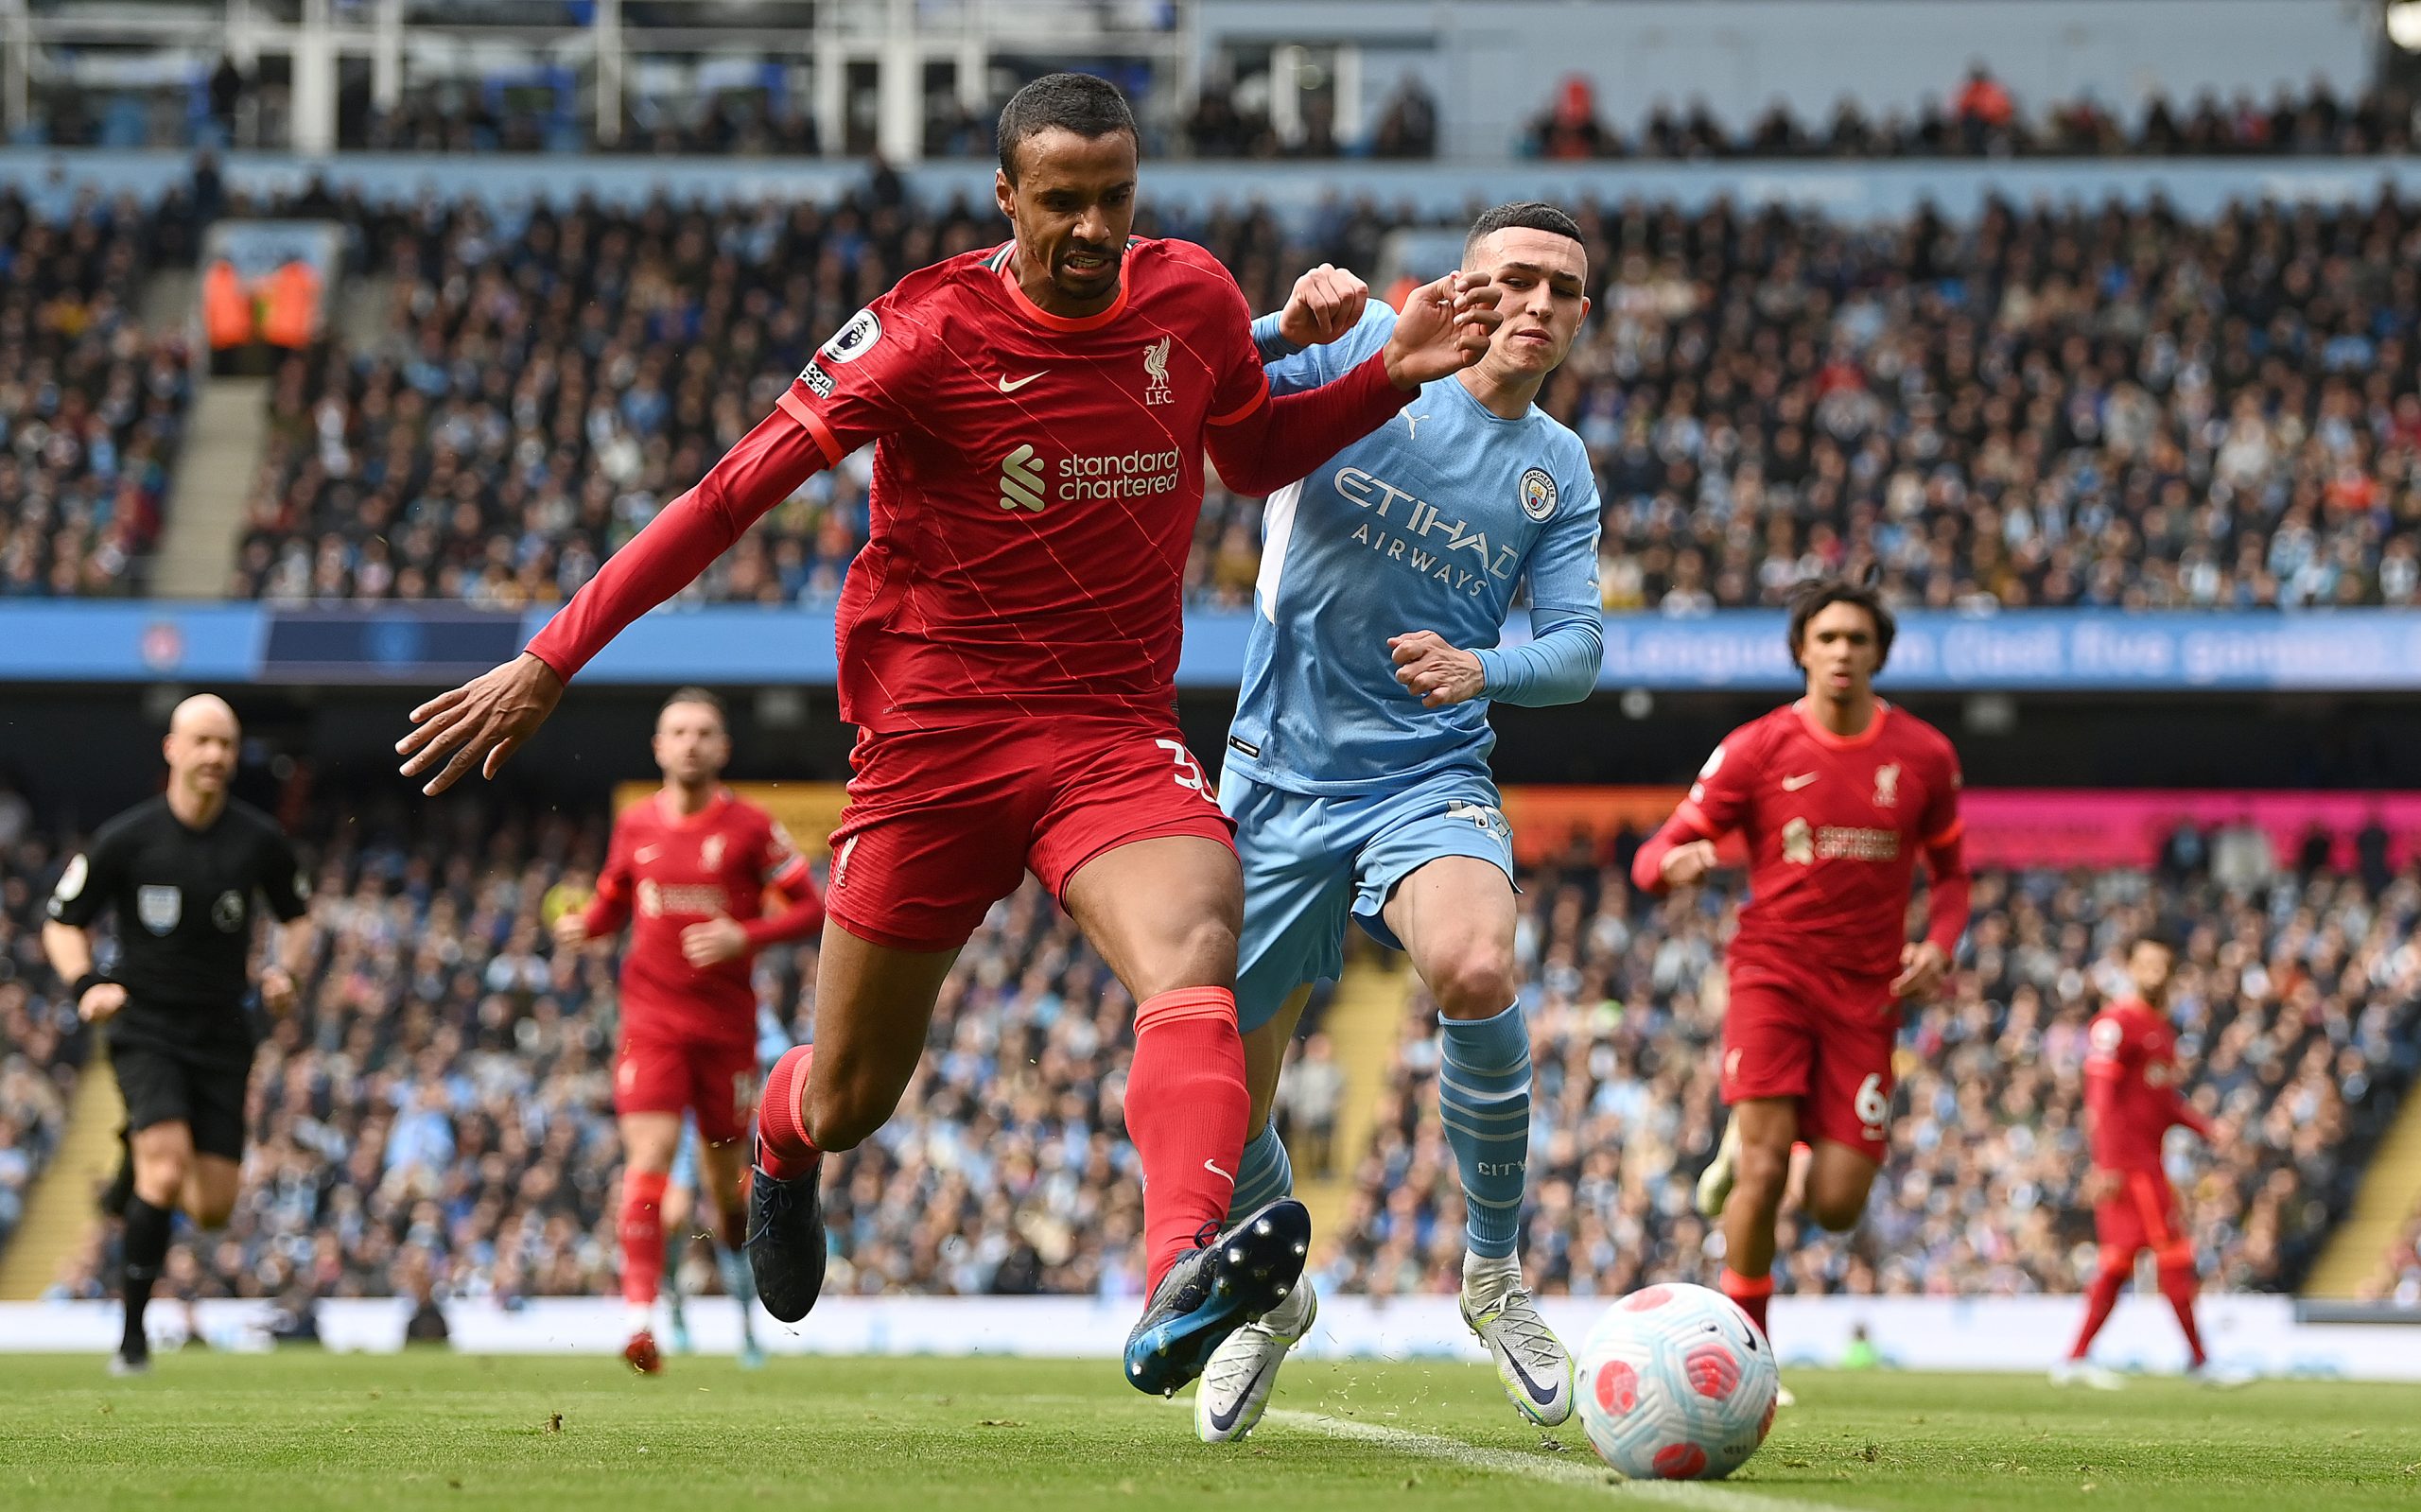 MANCHESTER, ENGLAND - APRIL 10: Joel Matip of Liverpool battles for possession with Phil Foden of Manchester City during the Premier League match between Manchester City and Liverpool at Etihad Stadium on April 10, 2022 in Manchester, England. (Photo by Shaun Botterill/Getty Images) The 4th Official uses images provided by the following image agency: Getty Images (https://www.gettyimages.de/) and Imago Images (https://www.imago-images.de/)